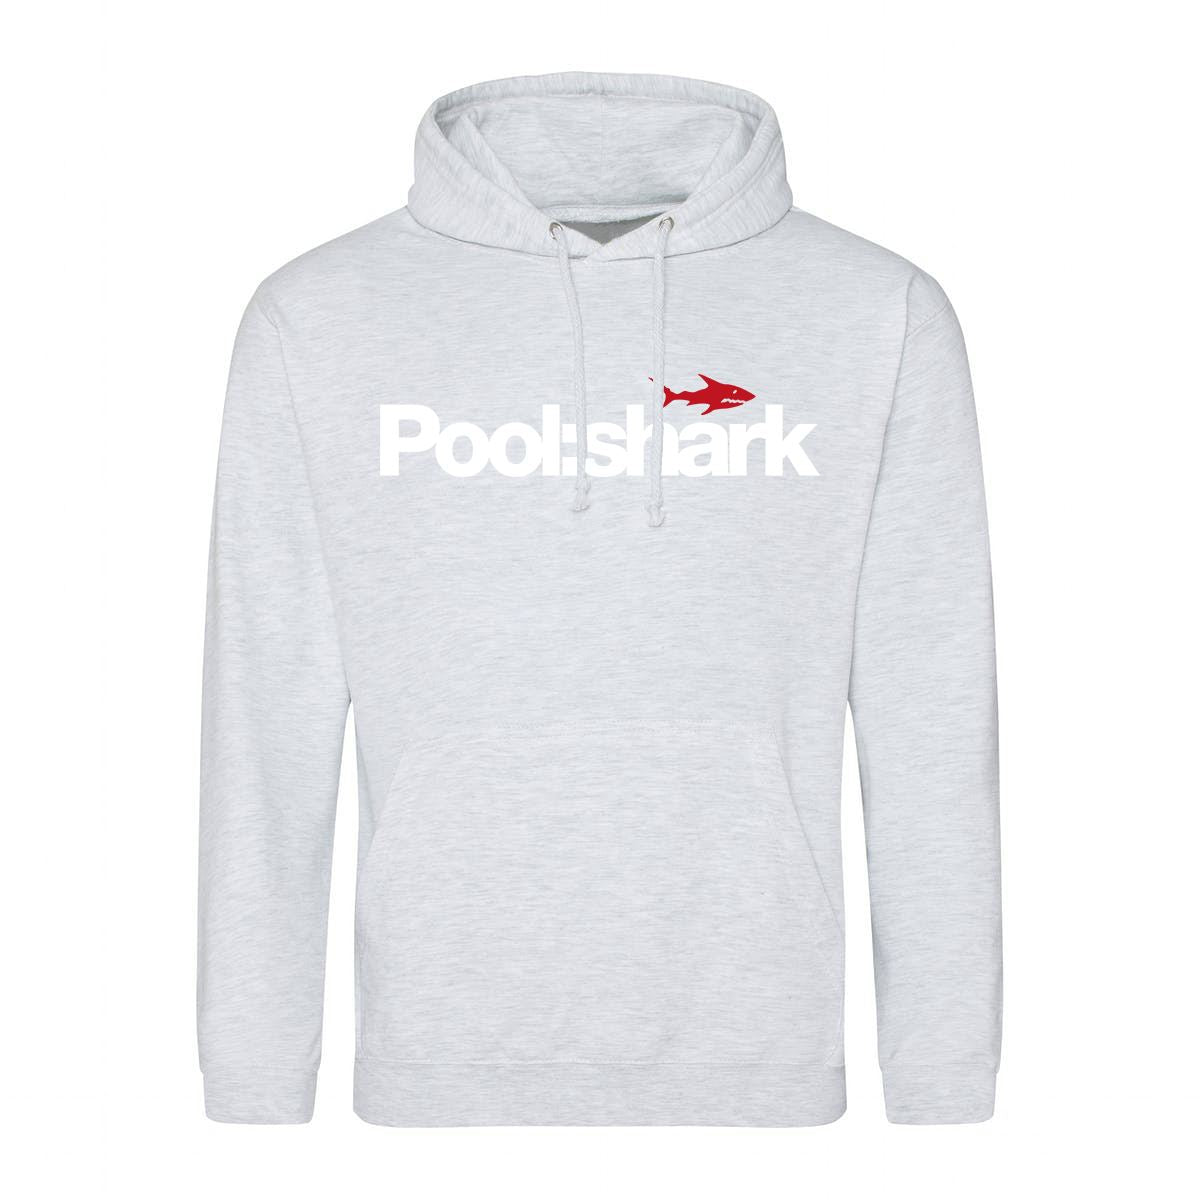 Poolshark Retro Gaming Hoodie Hoodie Seven Squared Small 36" Chest Ash 